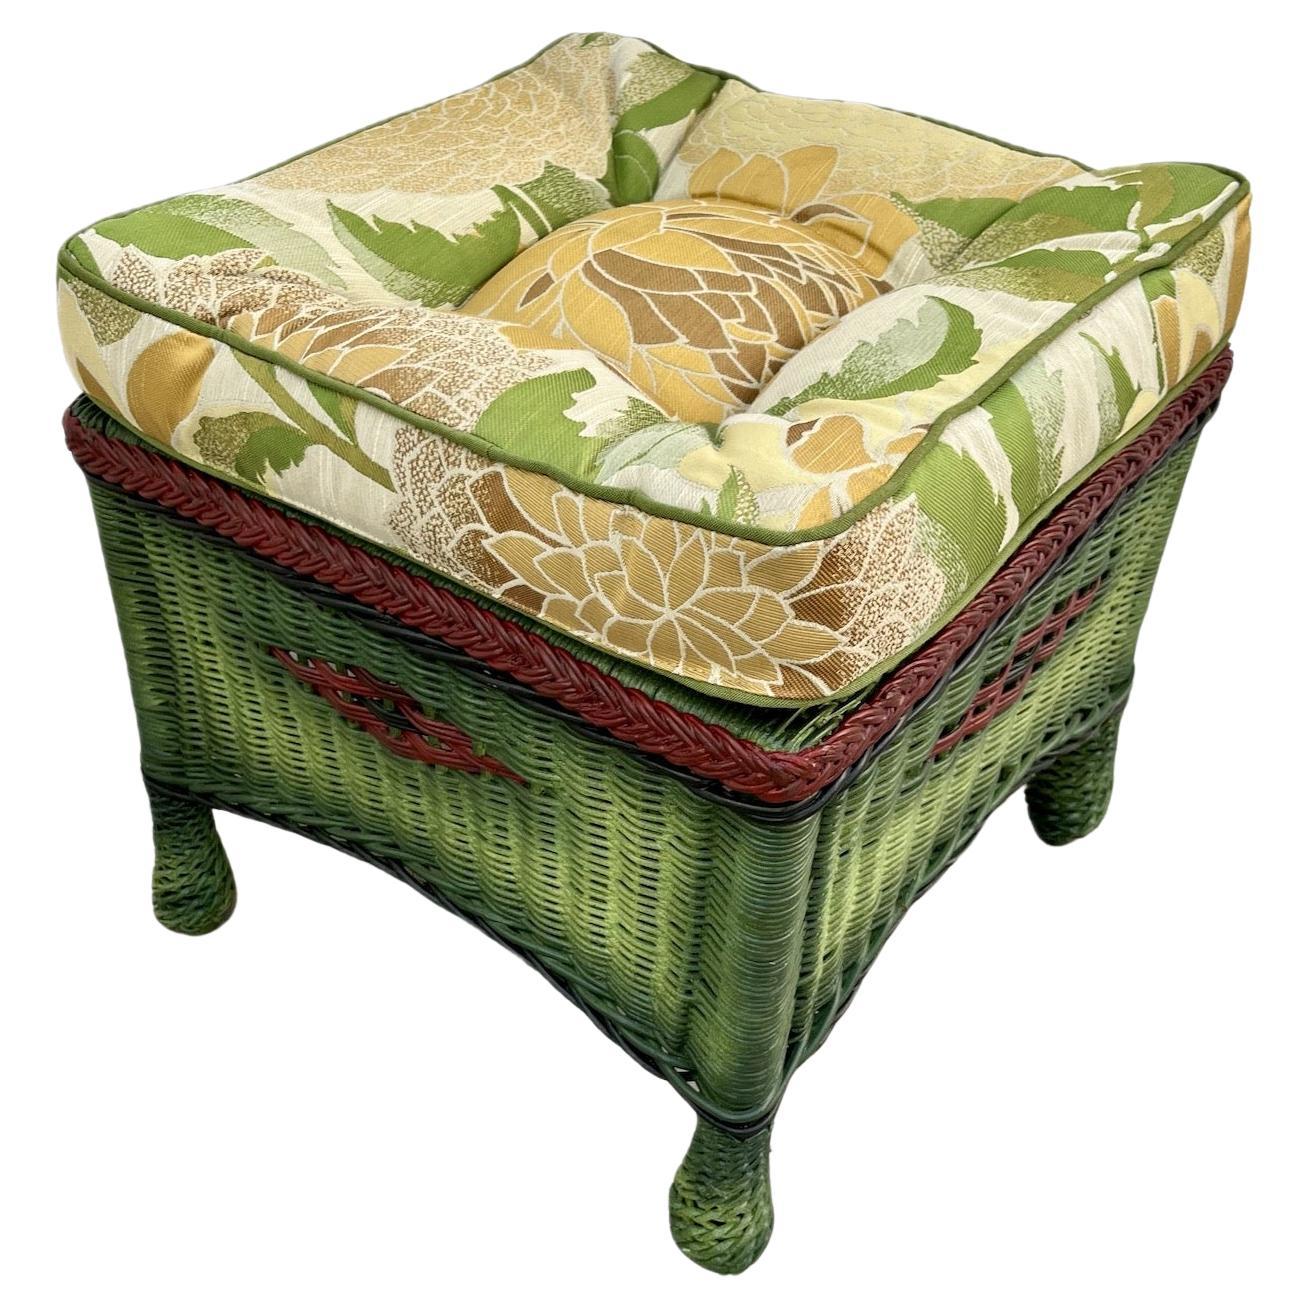 A Square Wicker Ottoman in French Green Finish with Colored Accents For Sale